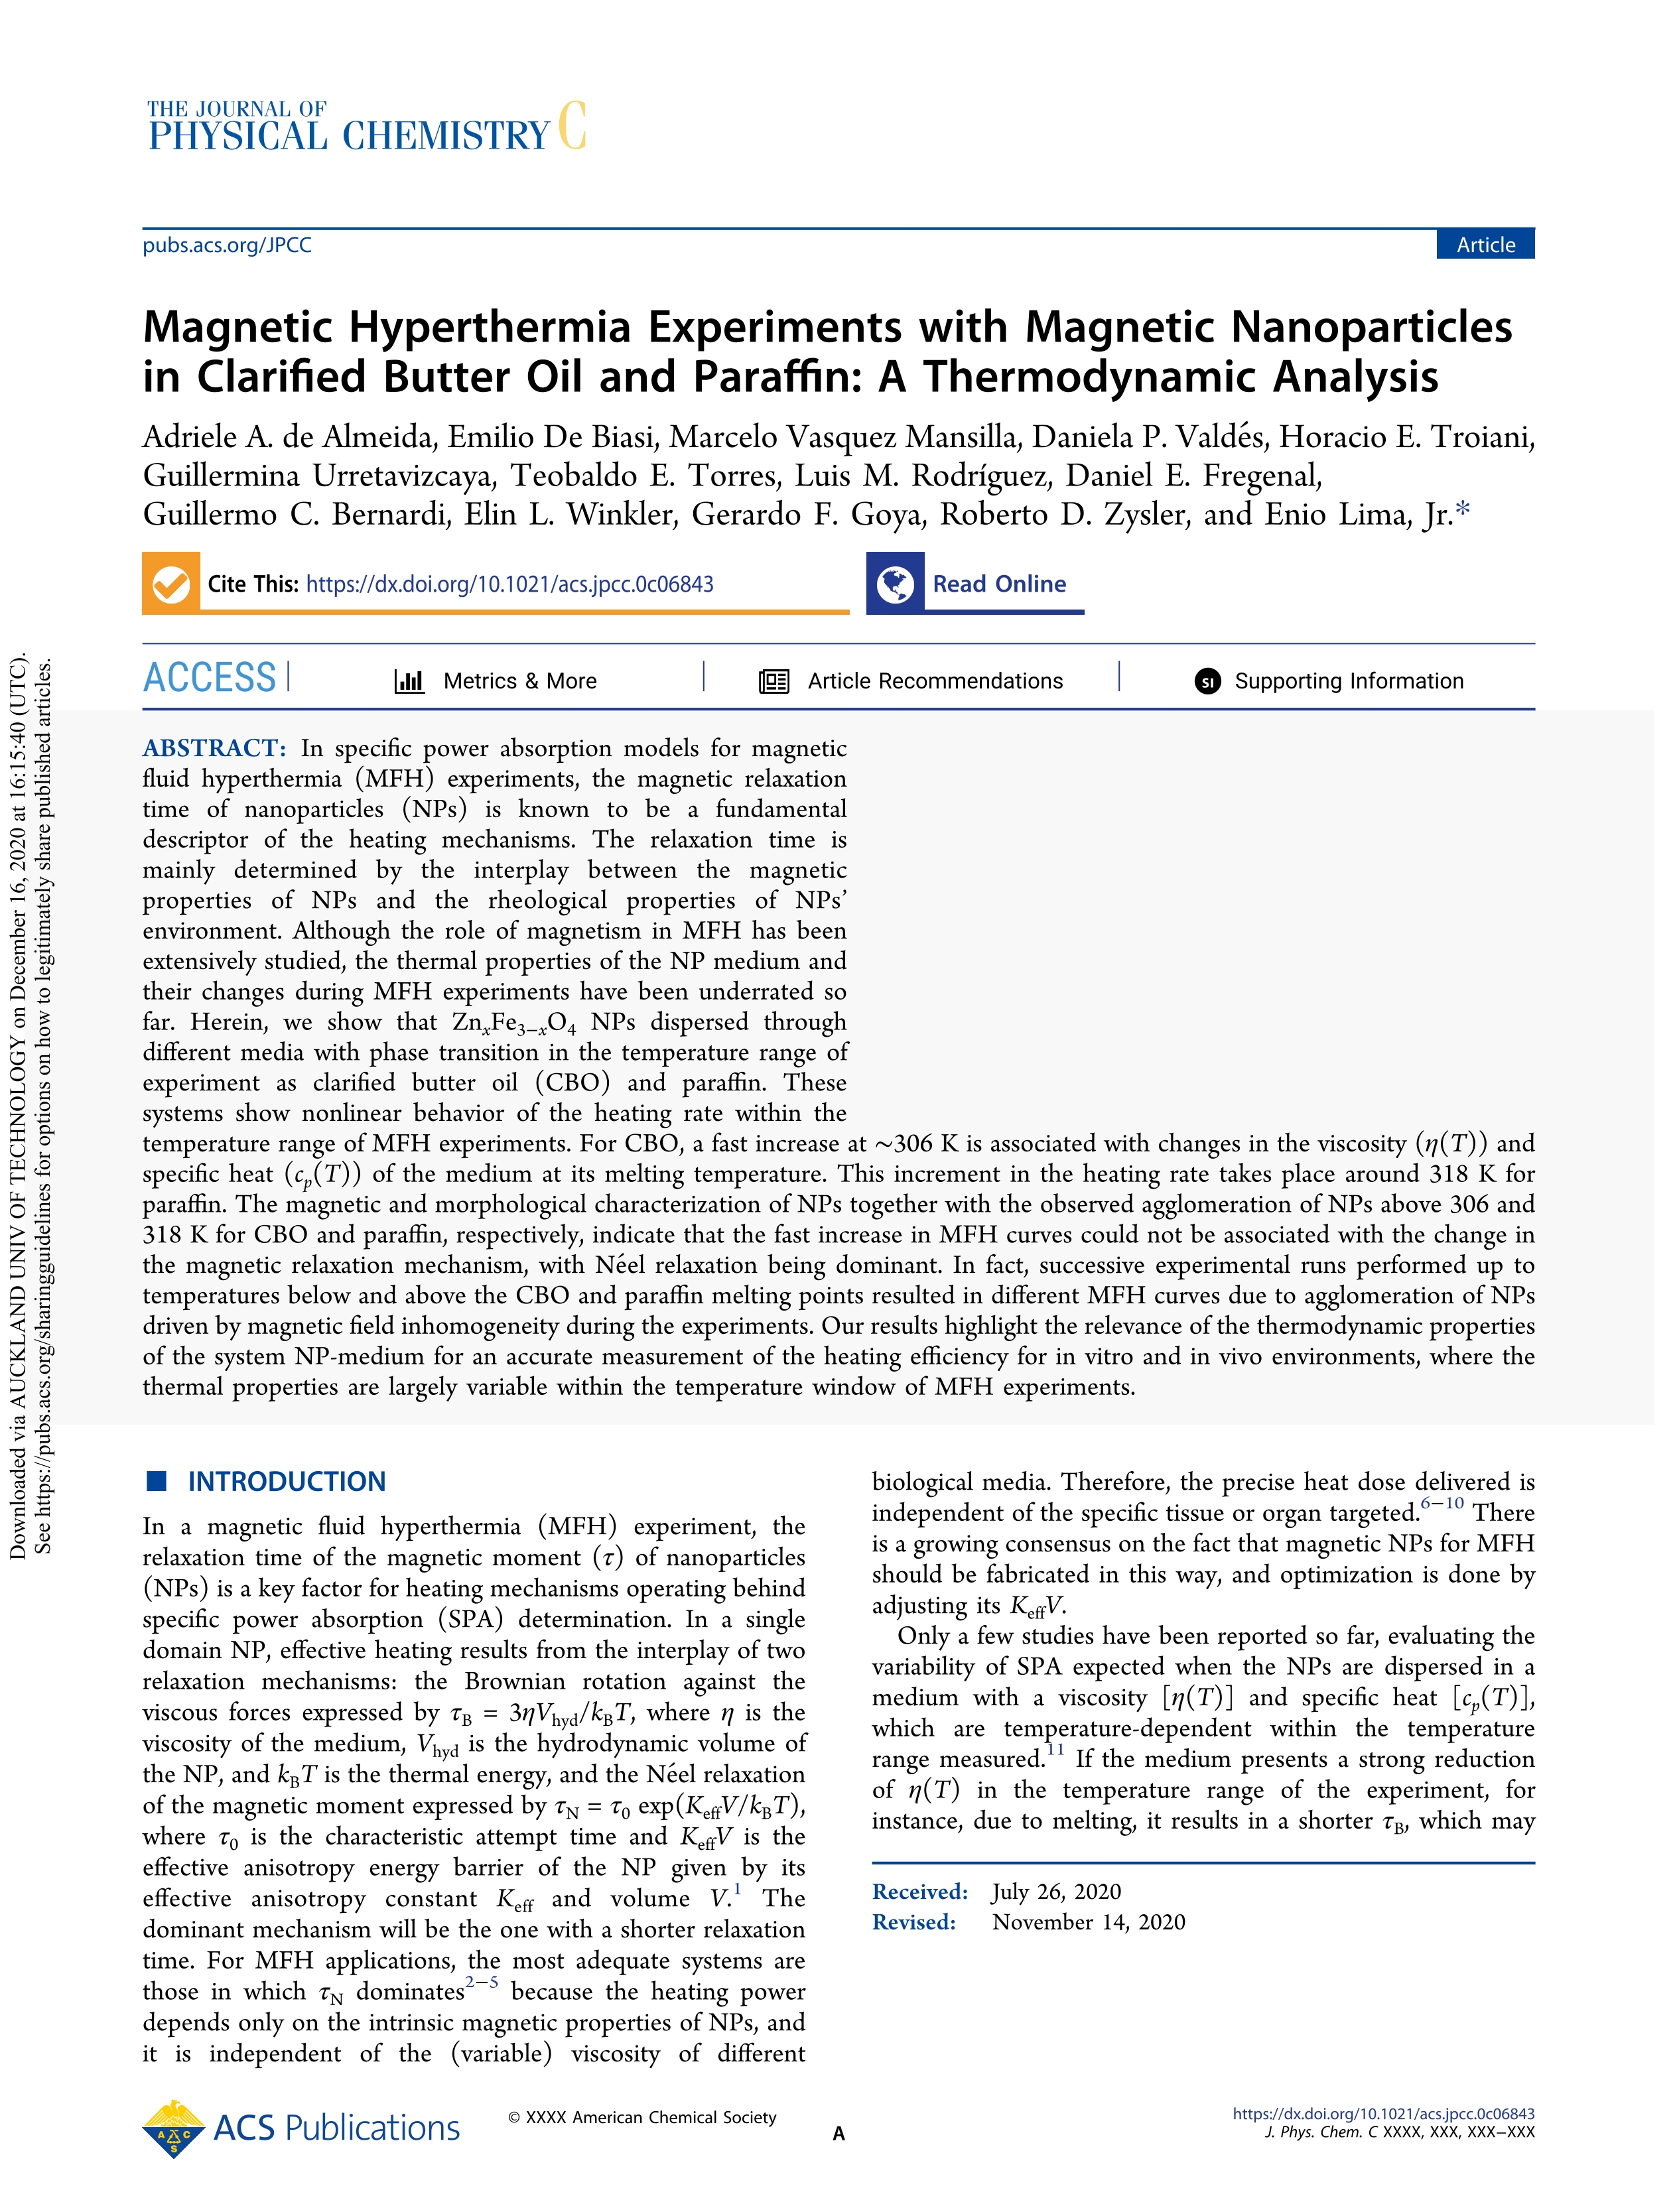 Magnetic hyperthermia experiments with magnetic nanoparticles in clarified butter oil and paraffin: A thermodynamic analysis